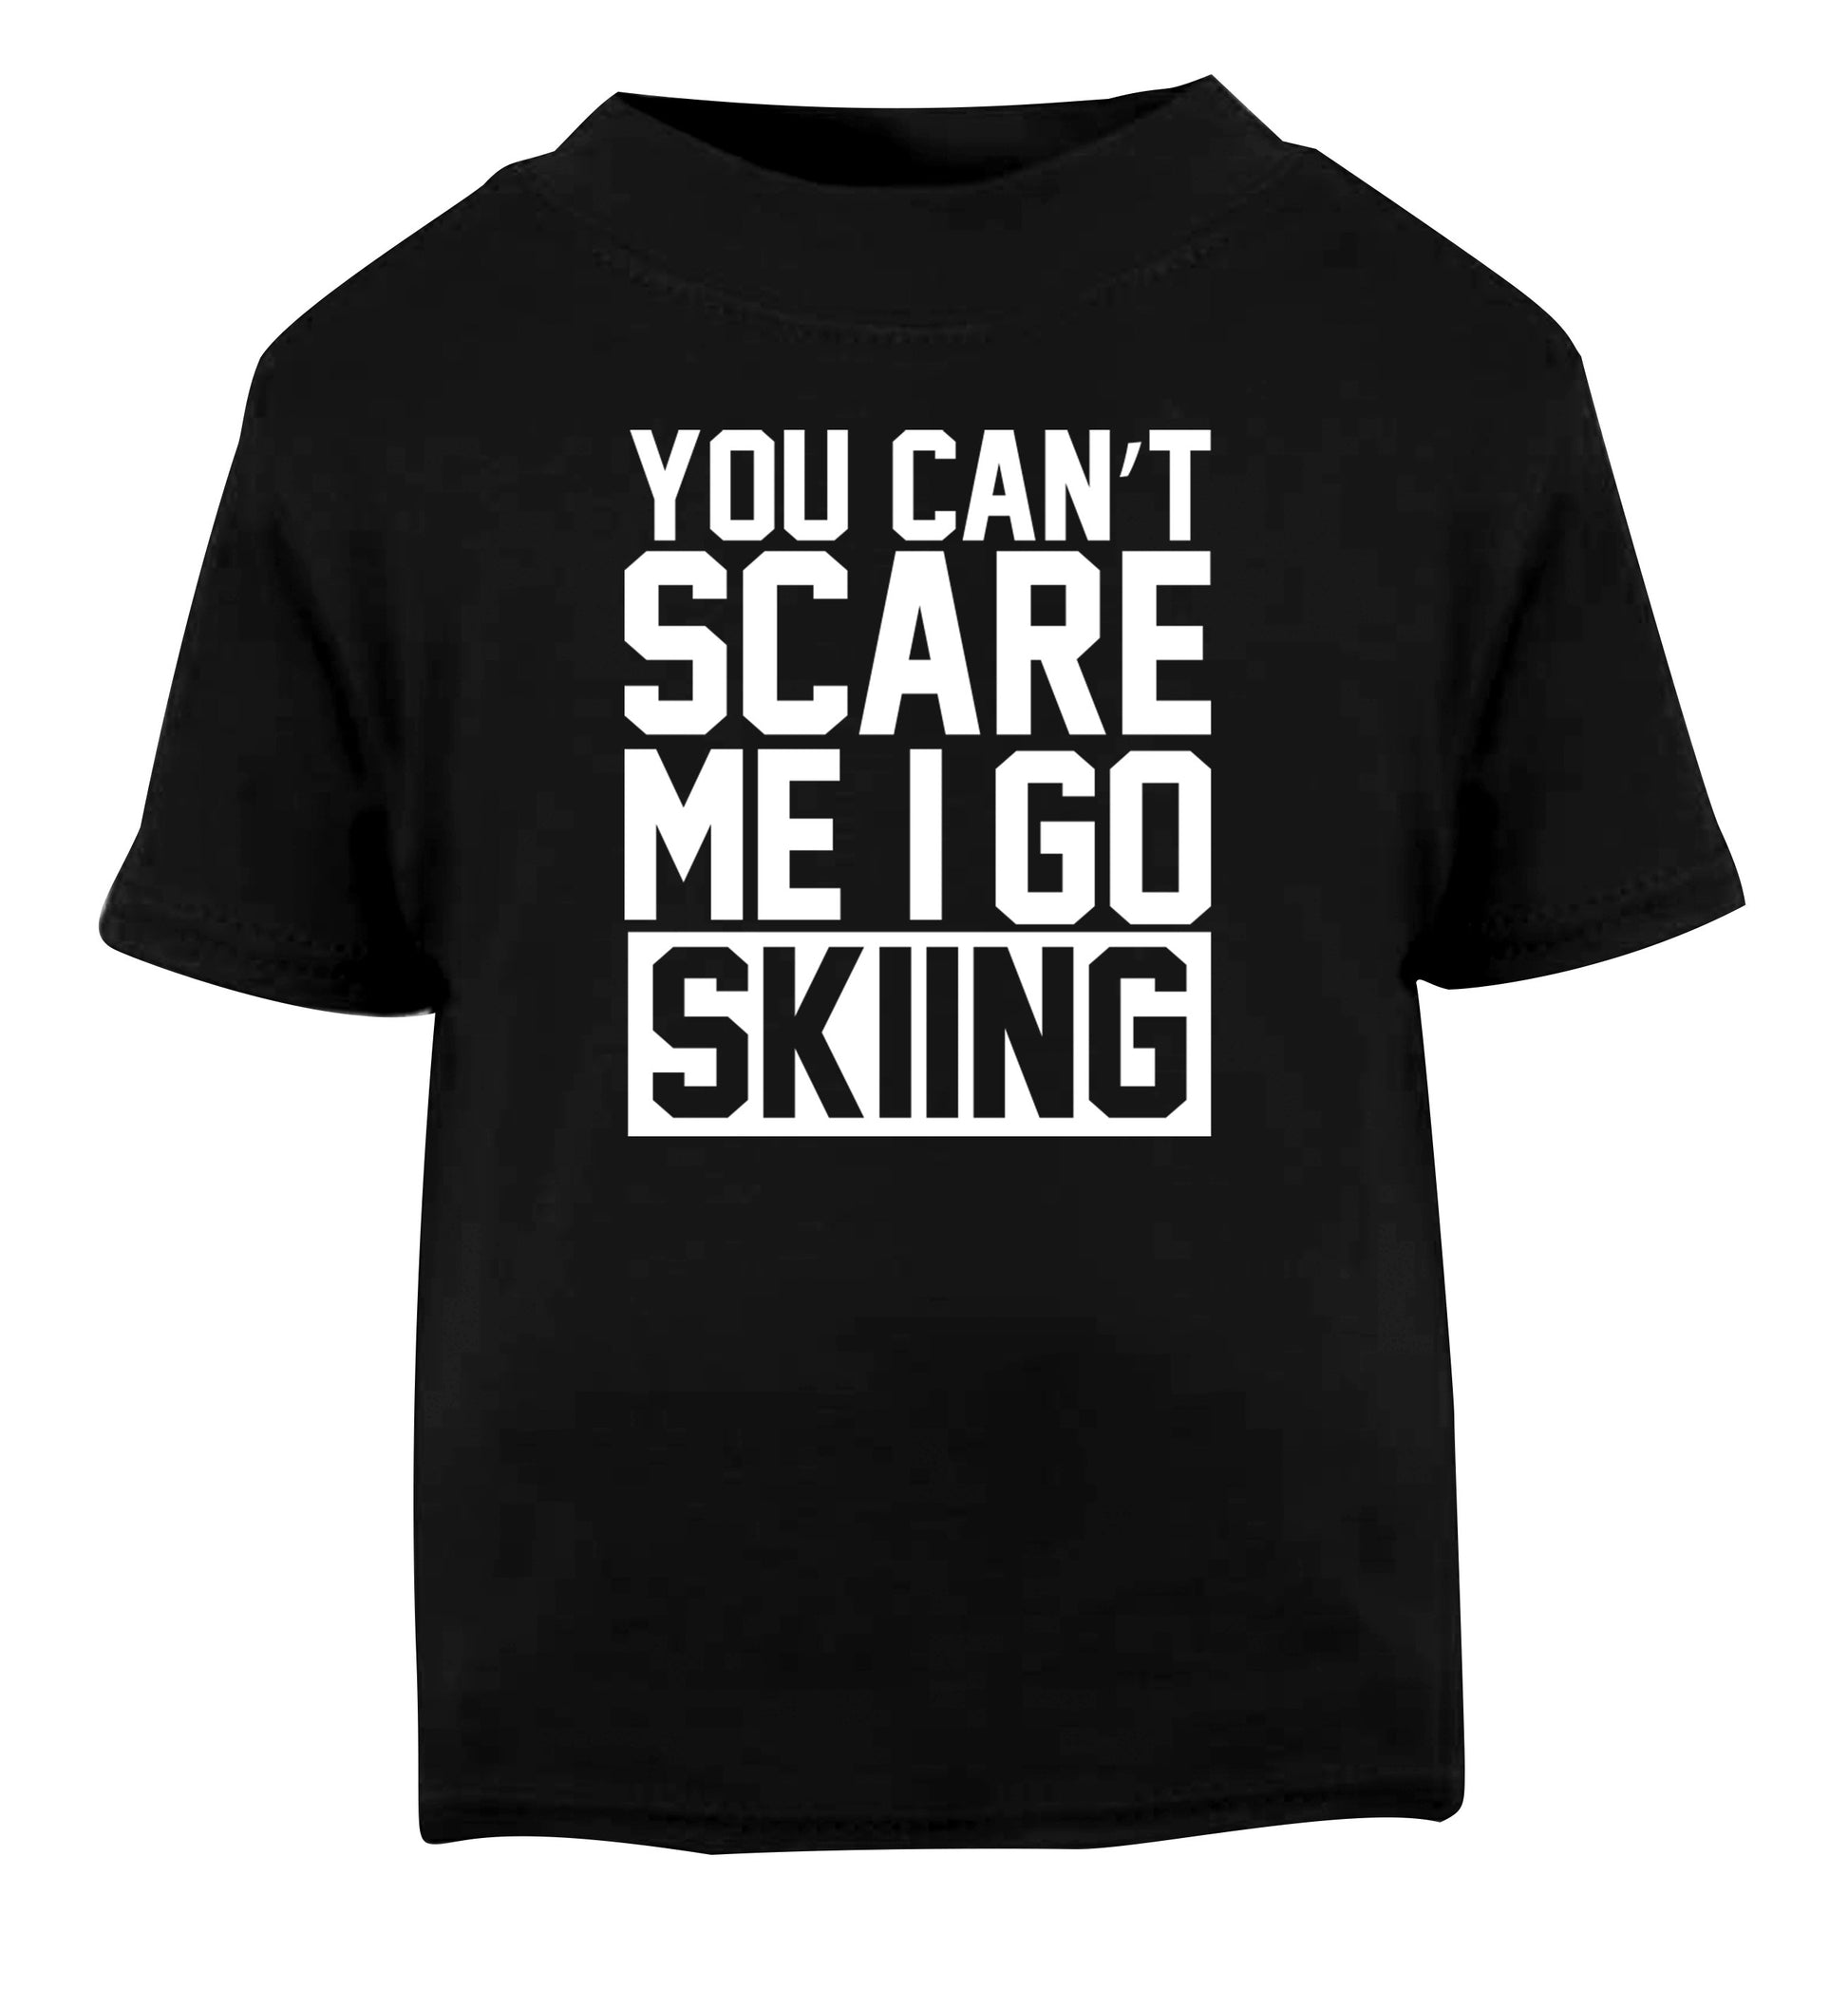 You can't scare me I go skiing Black Baby Toddler Tshirt 2 years